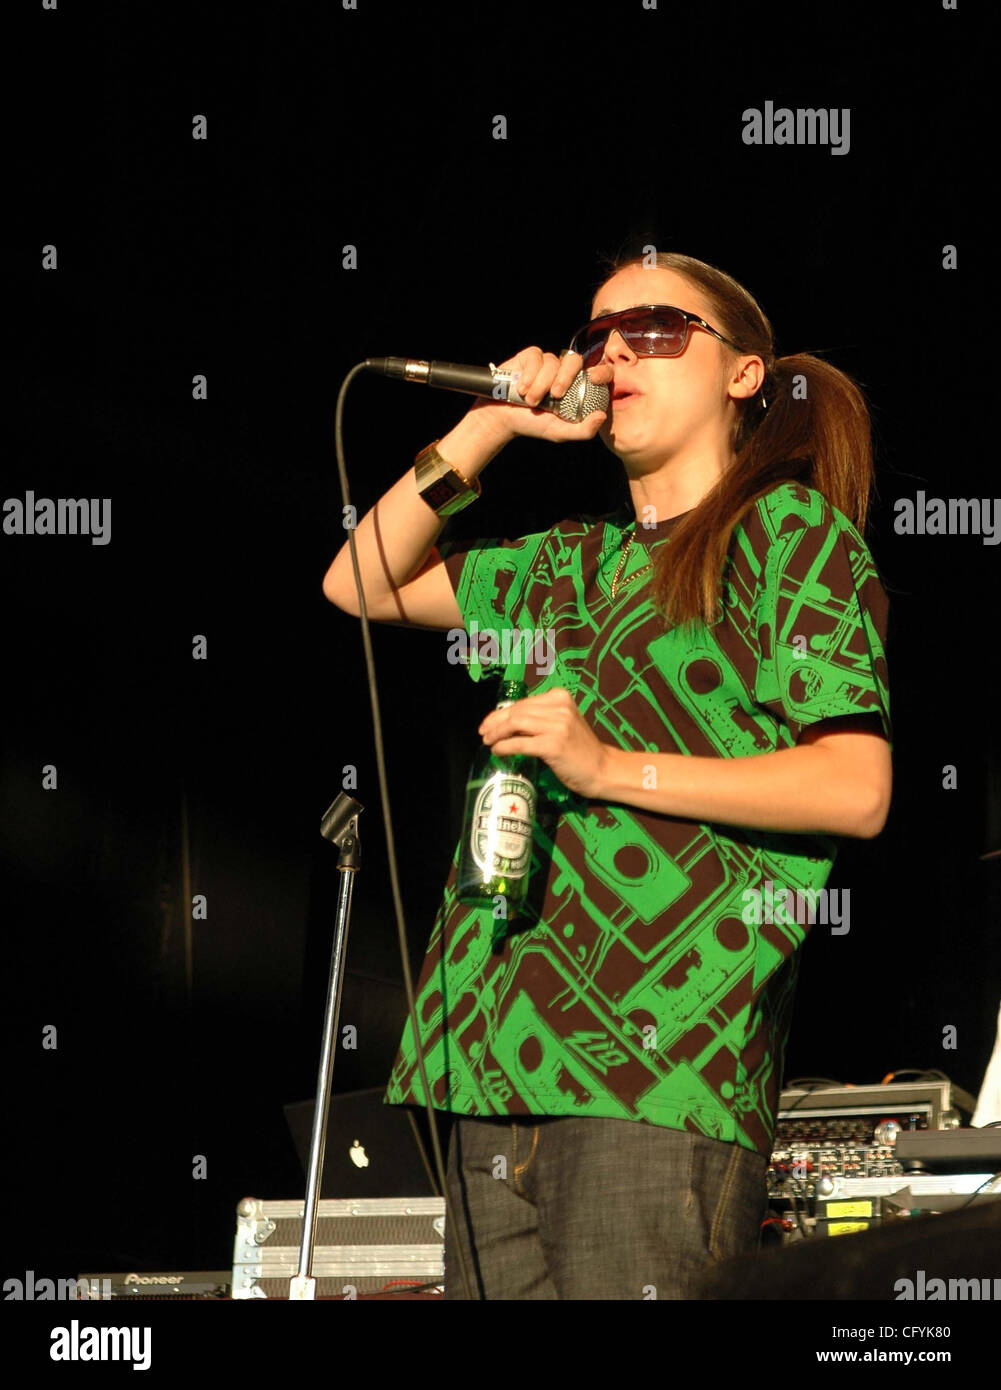 British rapper, Lady Sovereign, performs at the Walnut Creek Amphitheater in Raleigh, NC on May 14, 2007 copyright Tina Fultz Stock Photo